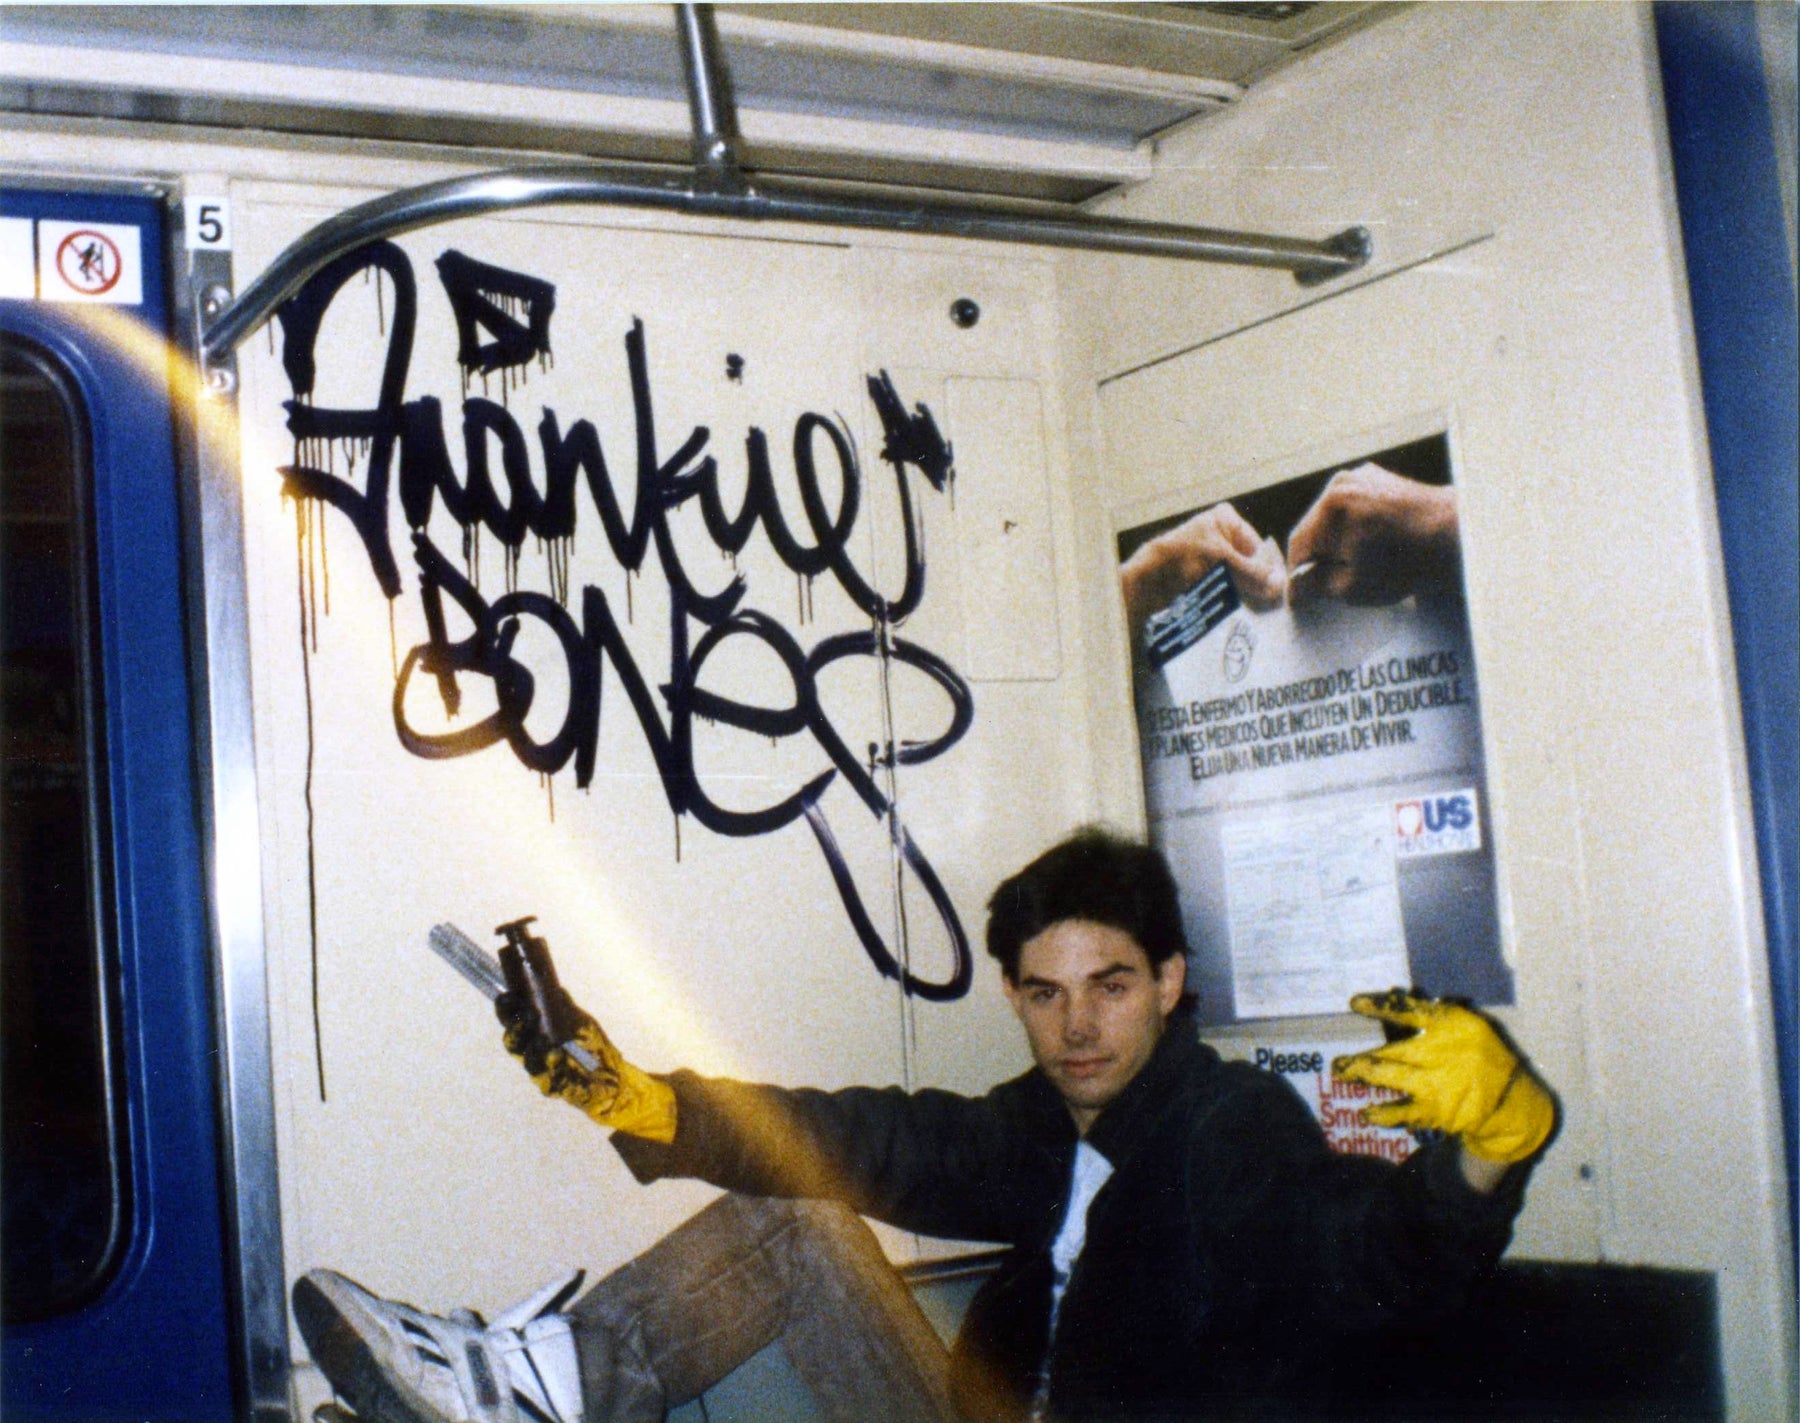 Dance music pioneers, brothers and New York graffiti legends  - on one 12” record